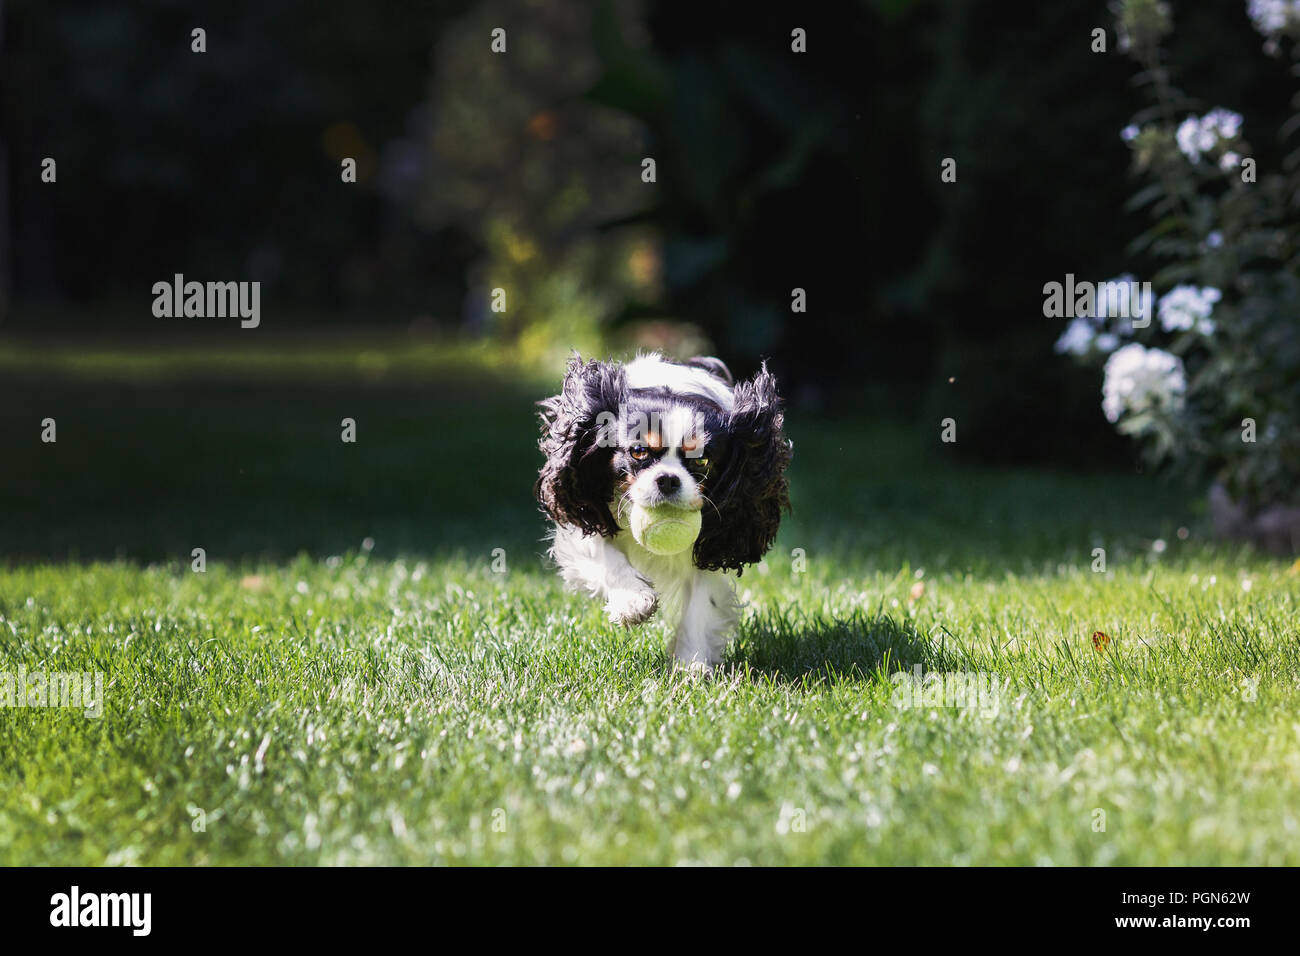 Cute dog fetching a ball and running in the garden Stock Photo